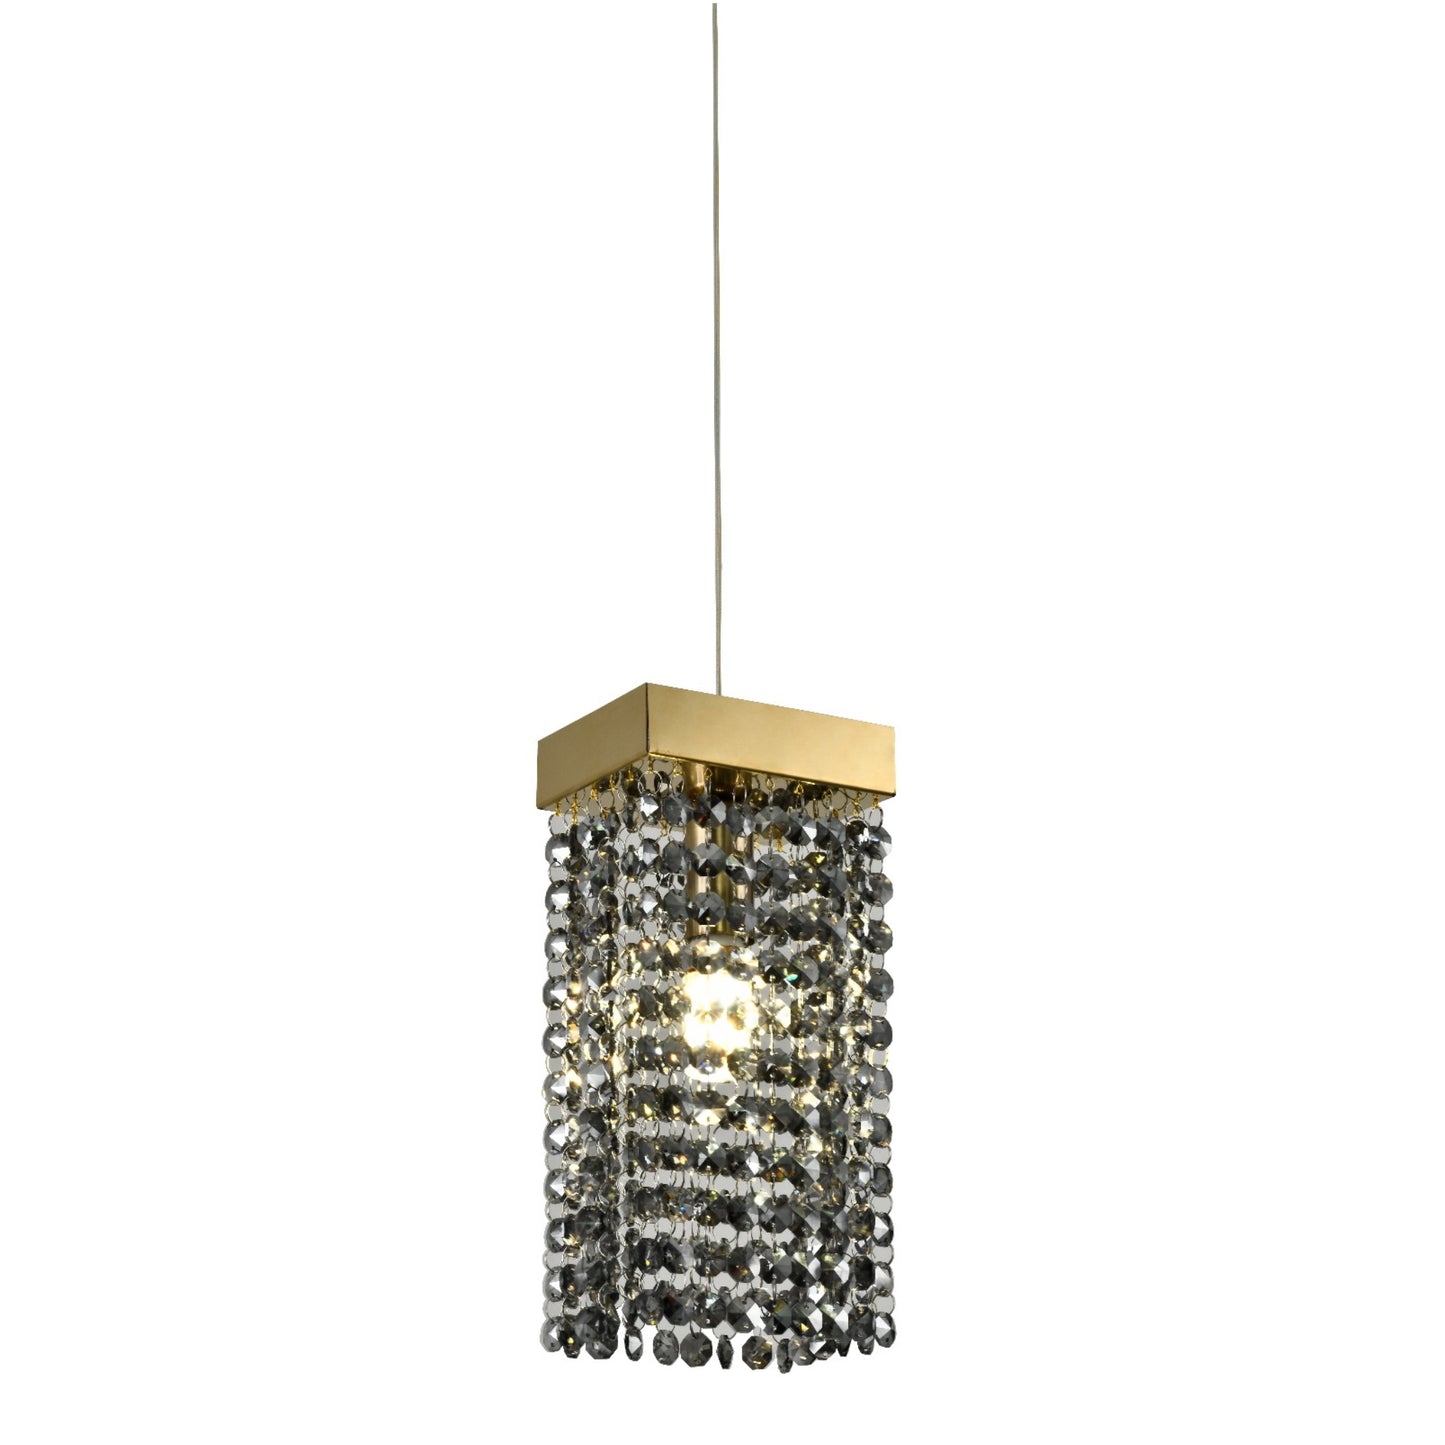 Our striking Astley pendant light in gold with smoked crystals is the perfect way to make a statement with your interiors. With its modern design, comprising of a delicately crafted smoked acrylic crystals in a hanging style from a gold rectangle base this light is the perfect addition to any space in your home.